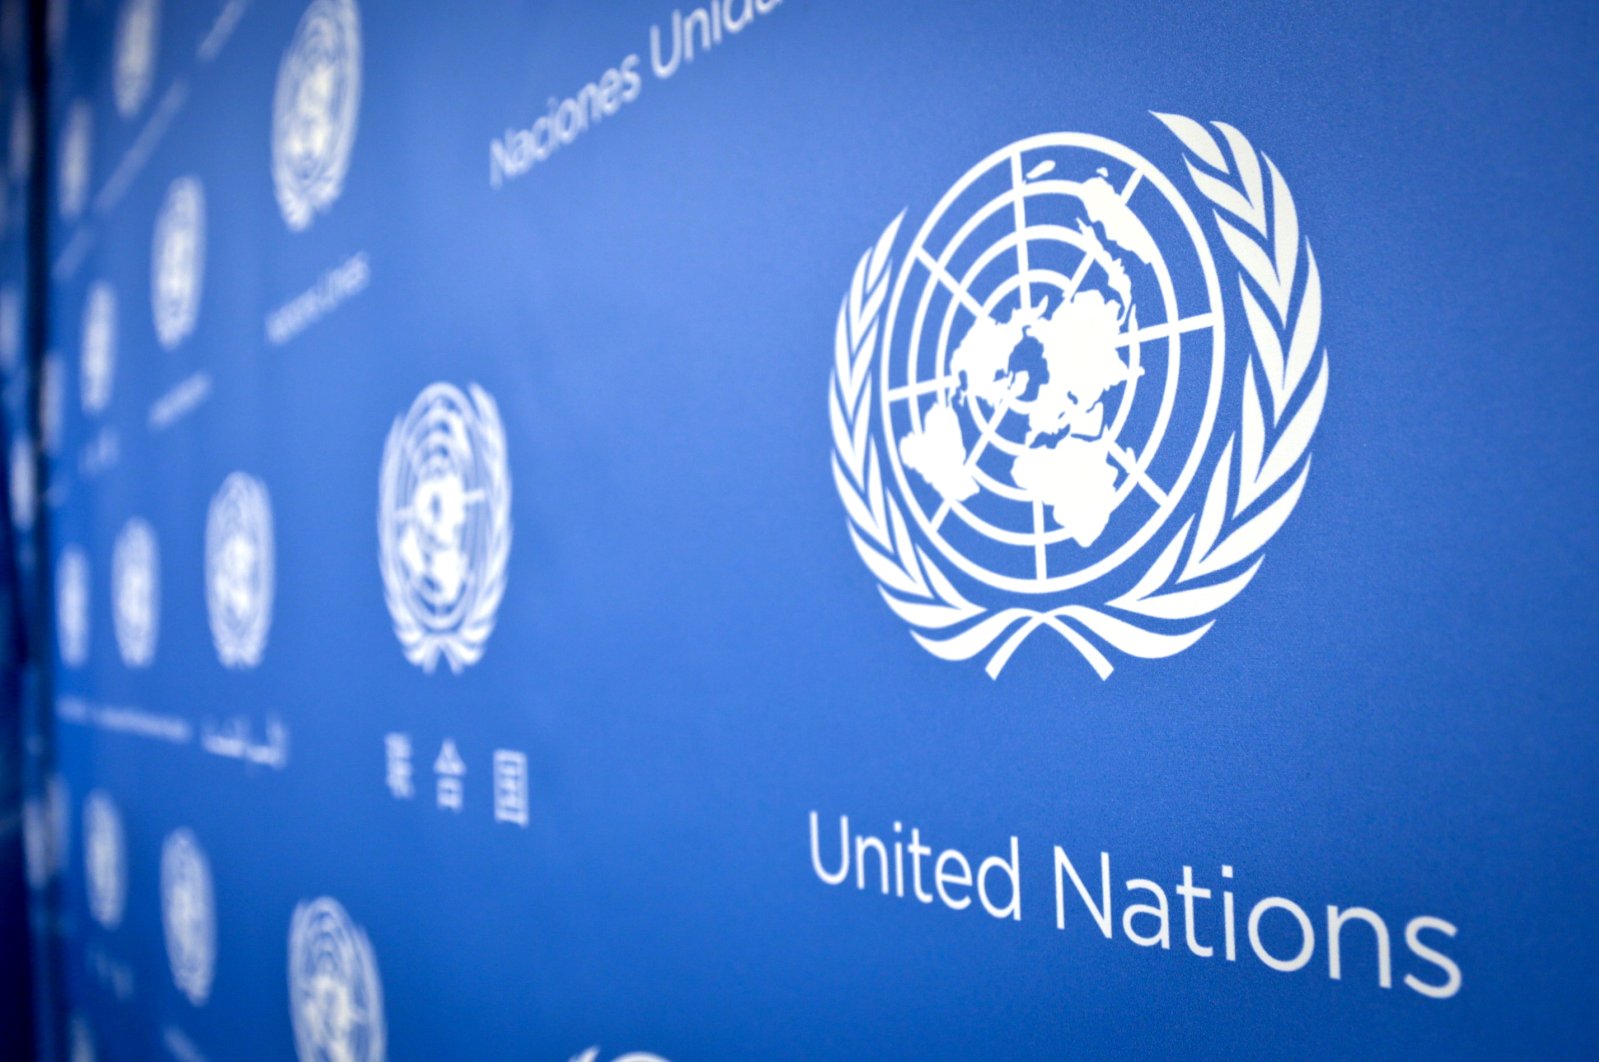 U.N. logo pattern on a press conference background at the United Nations headquarters, New York, U.S., Sept. 3, 2013. (AP File Photo)